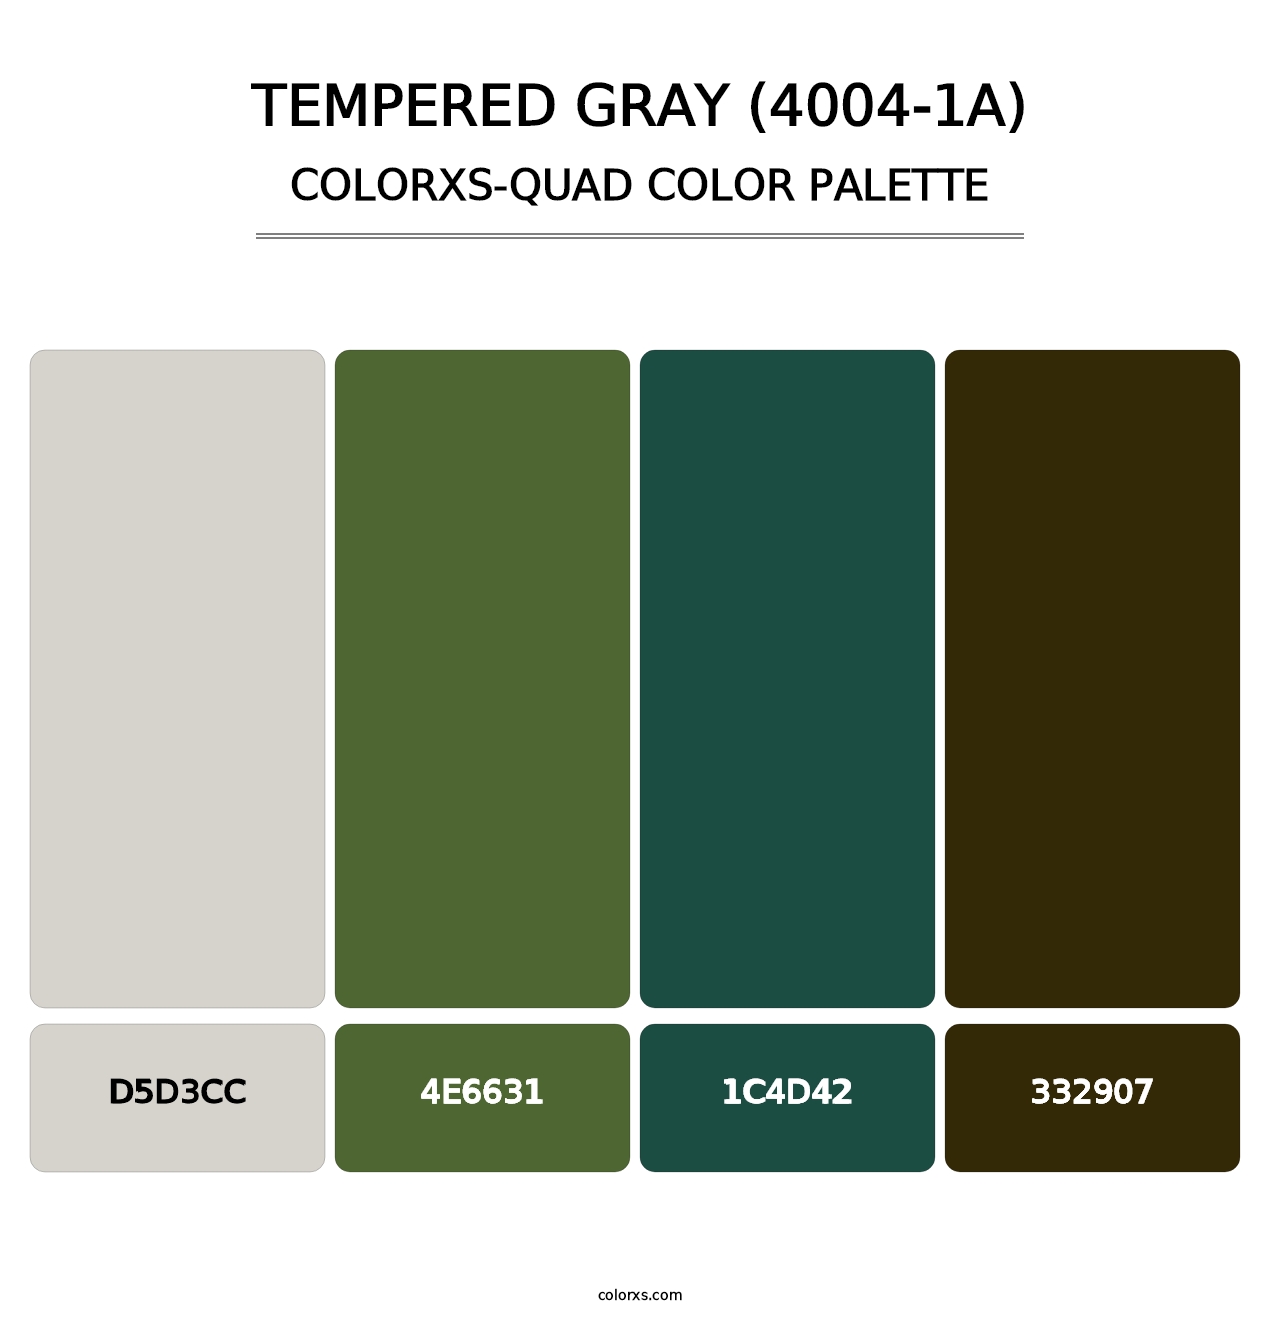 Tempered Gray (4004-1A) - Colorxs Quad Palette